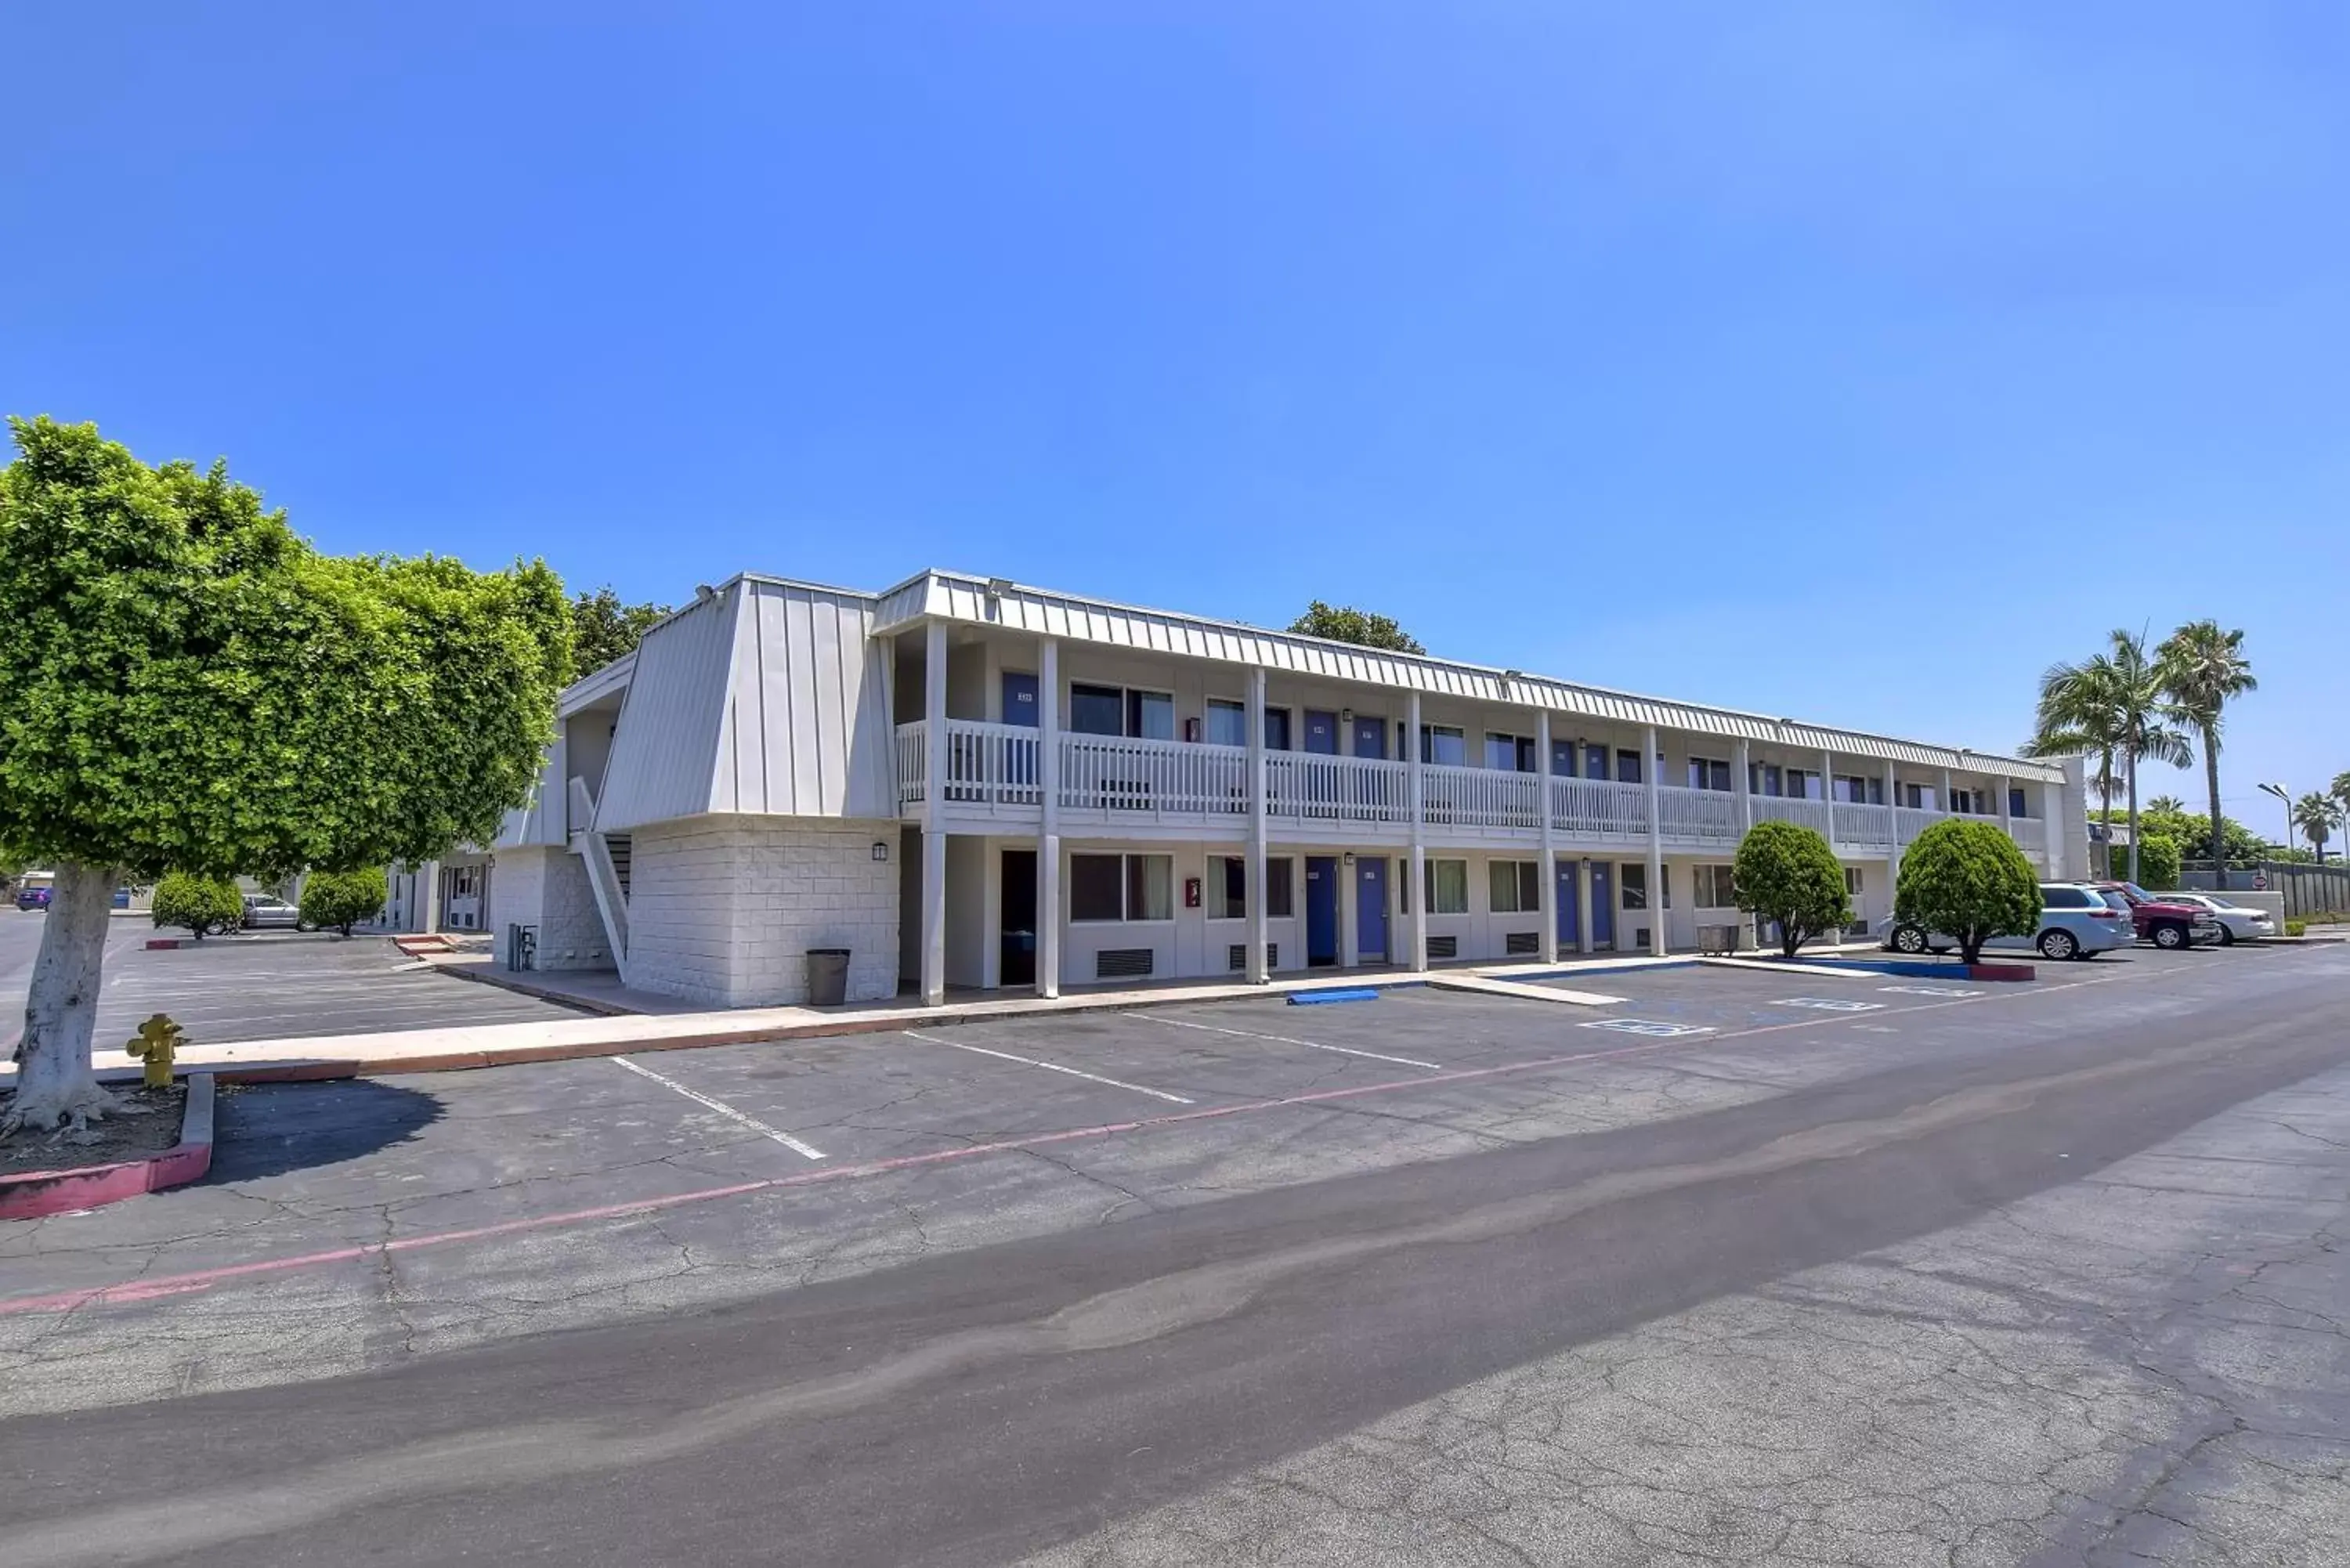 Property Building in Motel 6-Claremont, CA